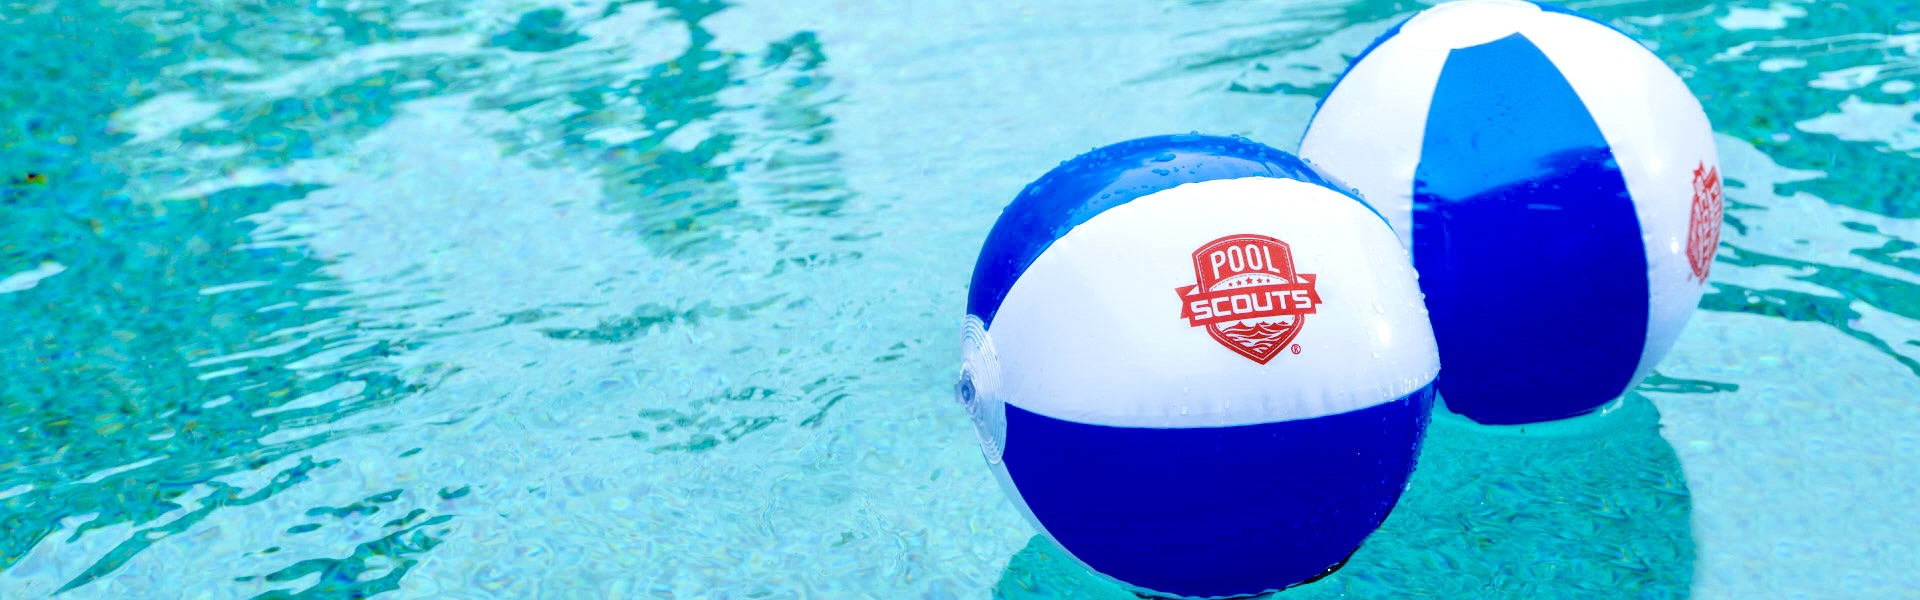 floaty balls with pool scouts logo in clean pool